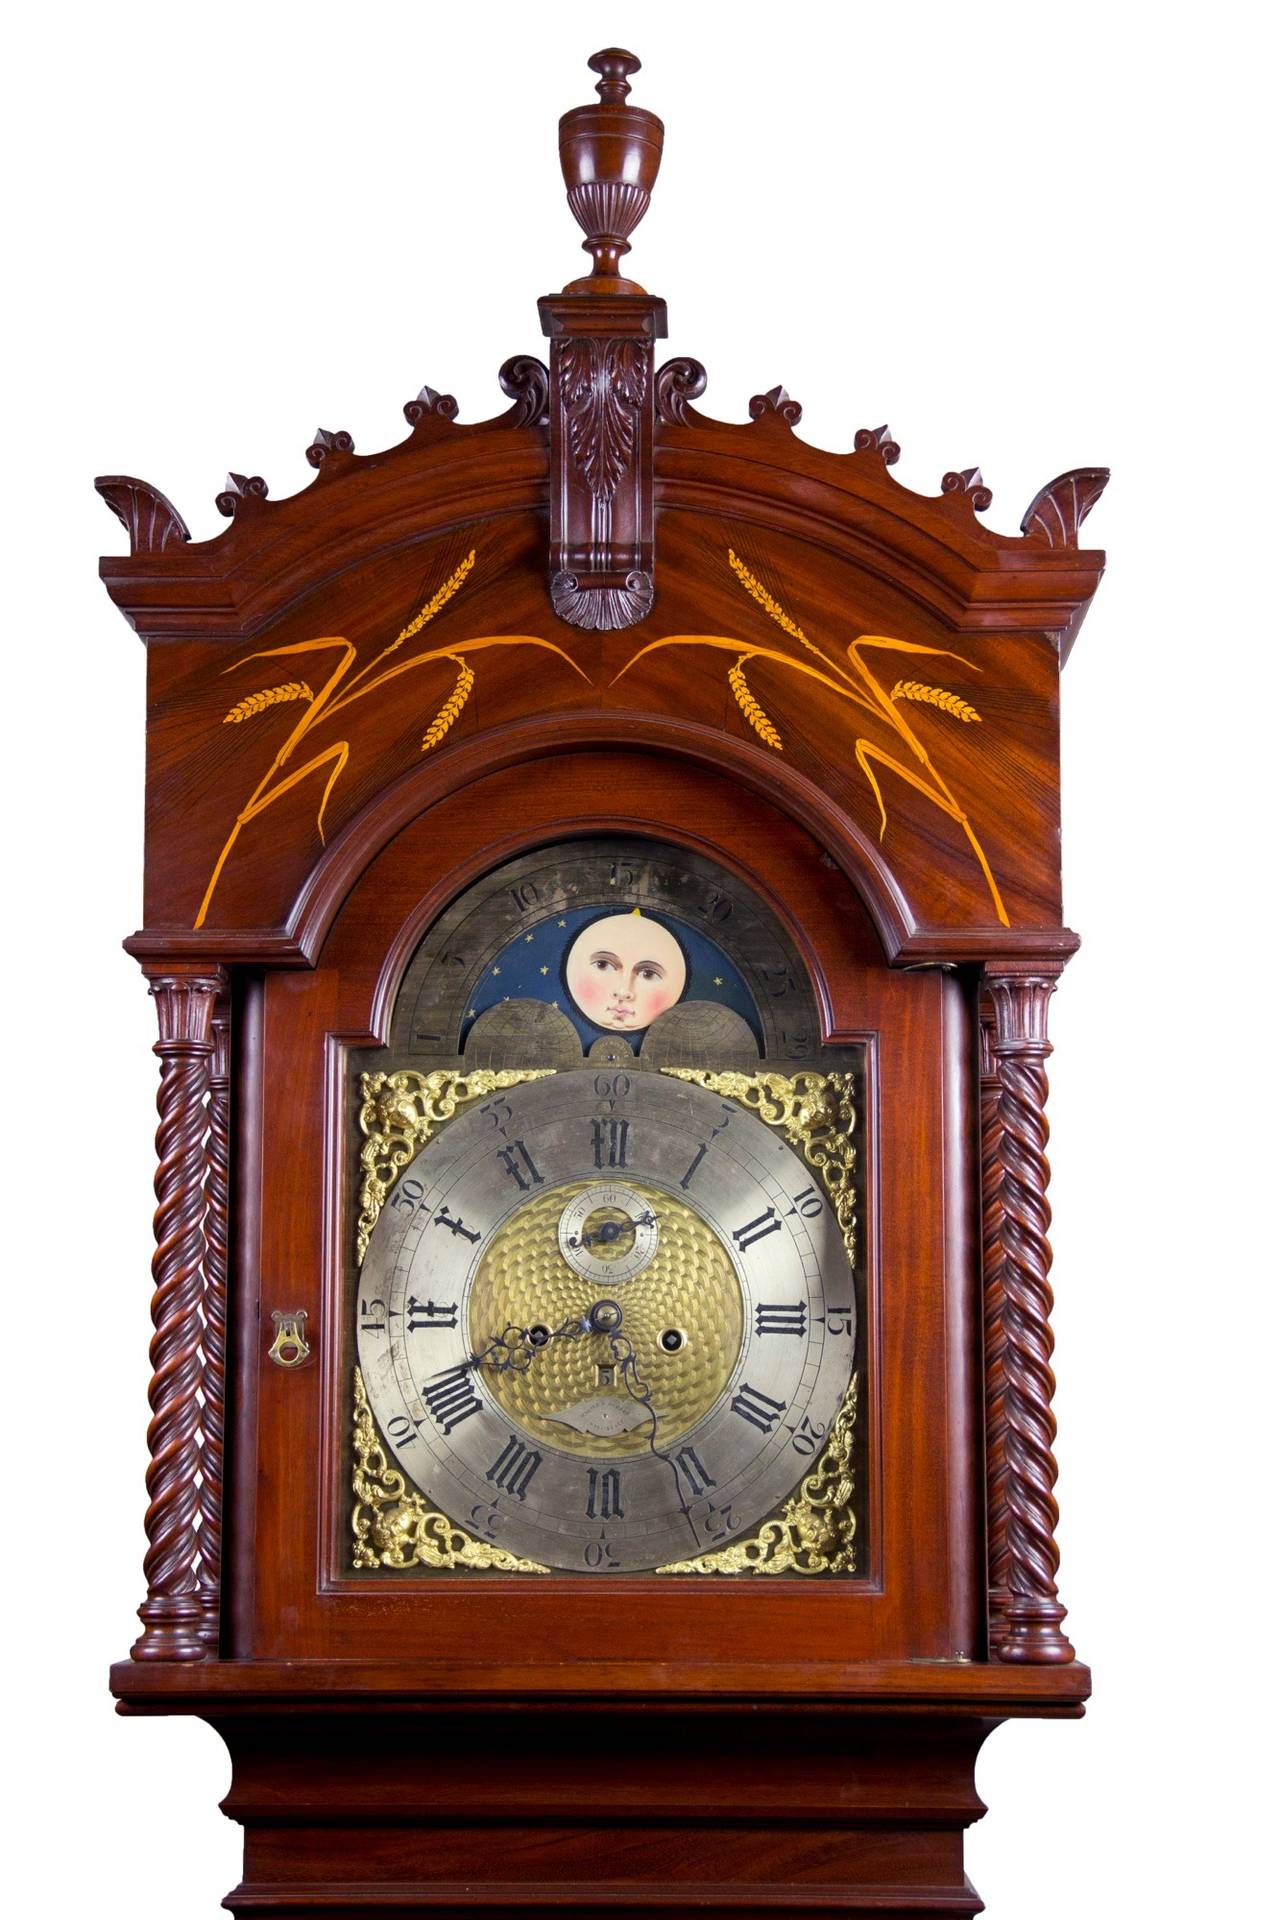 At the turn of the century, embellishment took a turn toward more naturalistic inlay representing flowers, poppies, etc. in a Japanesque context. This is the only time we have seen this used in a clock. Walter Durfee, of Providence, RI was credited